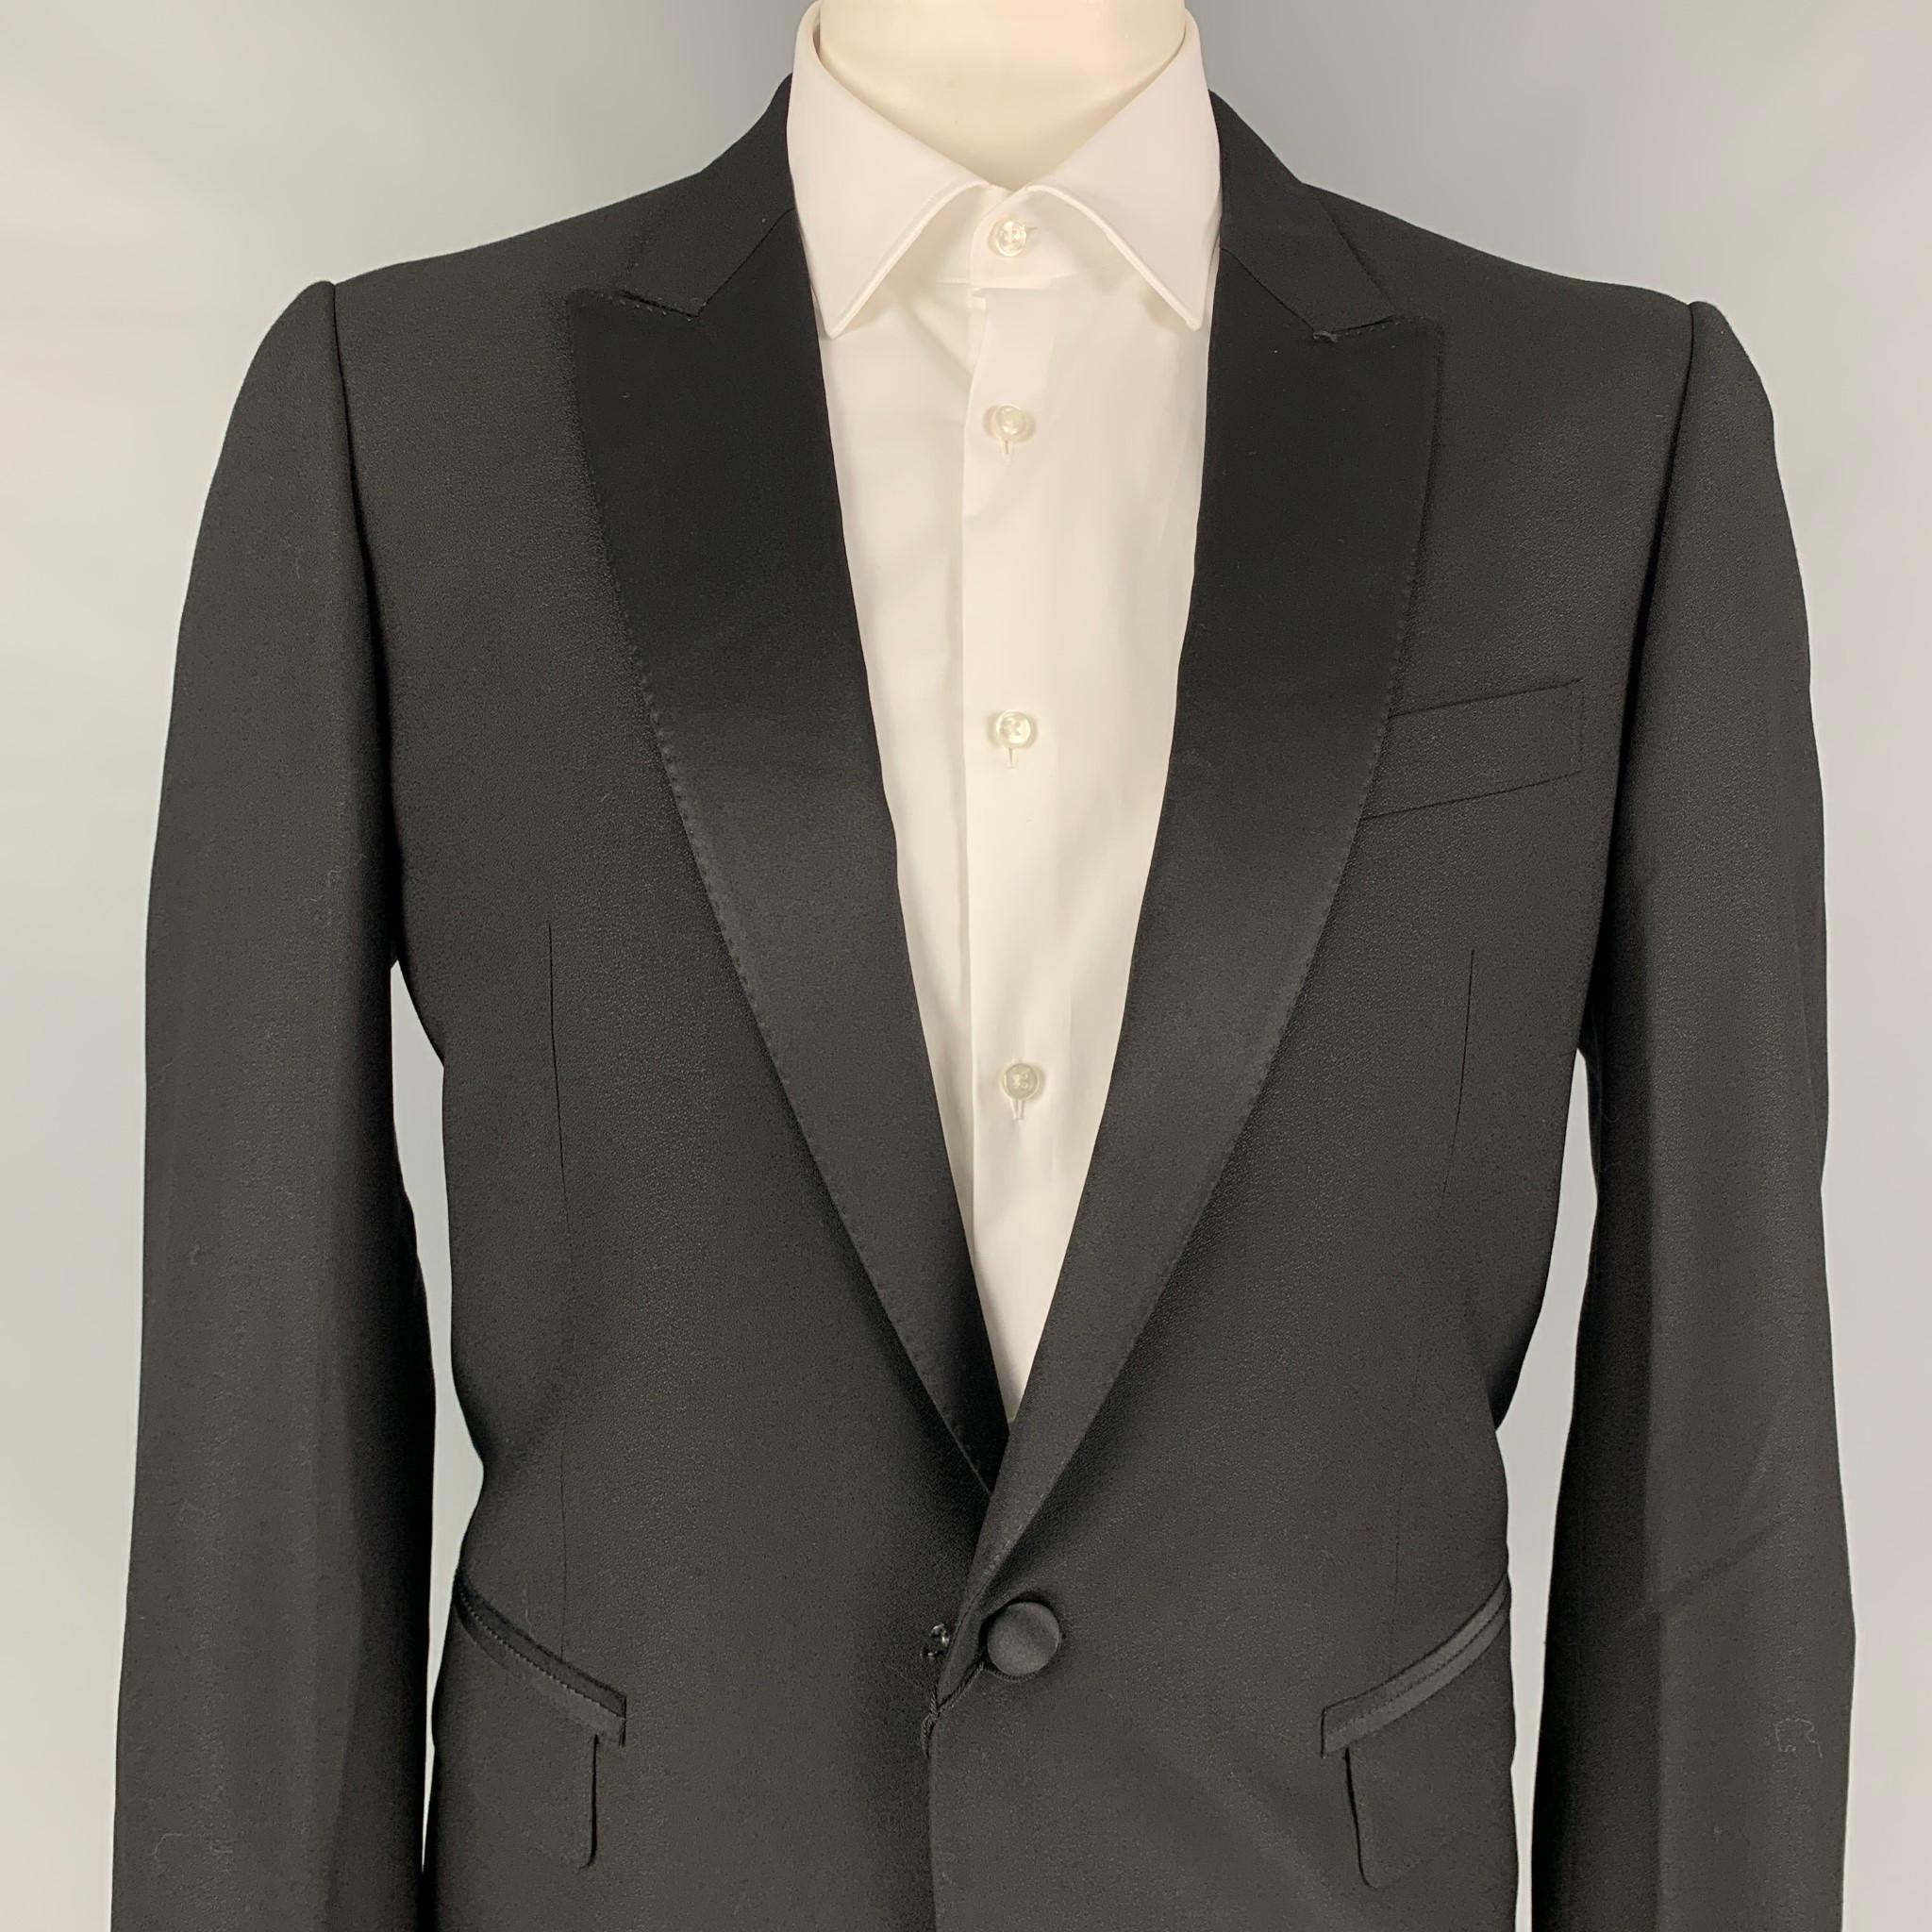 LANVIN sport coat comes in a black wool with a full liner featuring a peak lapel, flap pockets, single back vent, and a single button closure. Made in Italy. 

New With Tags. 
Marked: 54

Measurements:

Shoulder: 18 in.
Chest: 44 in.
Sleeve: 27